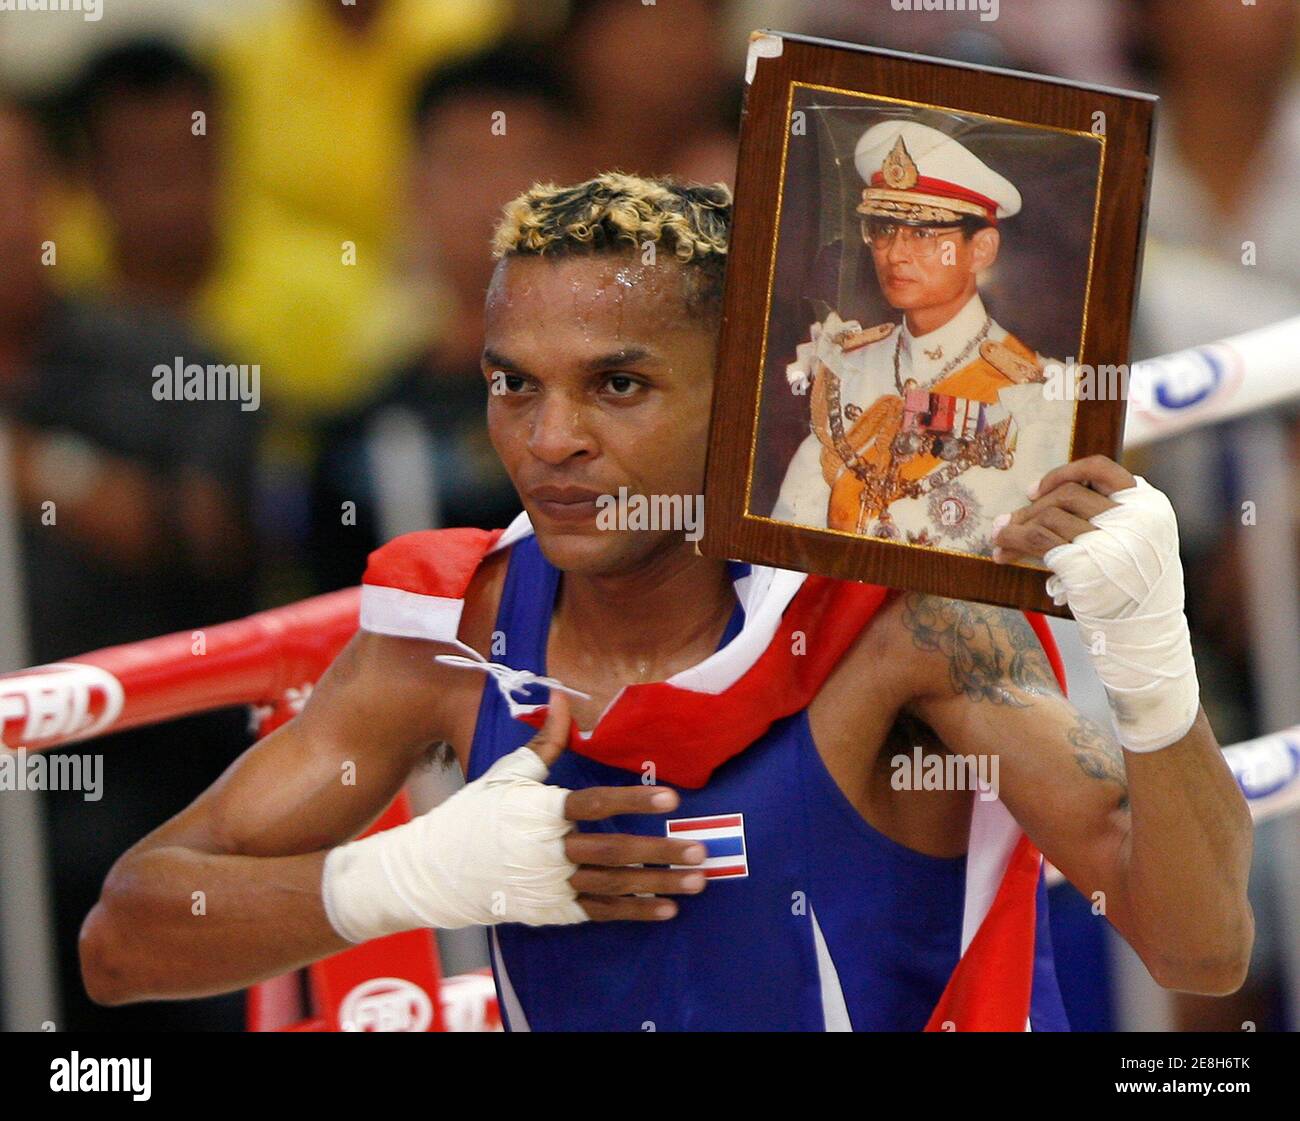 Thailand's Amnat Ruenroeng celebrates as he holds a portrait of Thailand's King Bhumibol Adulyadej after his win over Malaysia's Zamzai Azizi Mohamad during the Men's Lt. flyweight 48kg boxing final at the SEA Games in Nakhon Ratchasima December 13, 2007. Amnat won to take the gold.   REUTERS/Chaiwat Subprasom (THAILAND) Stock Photo